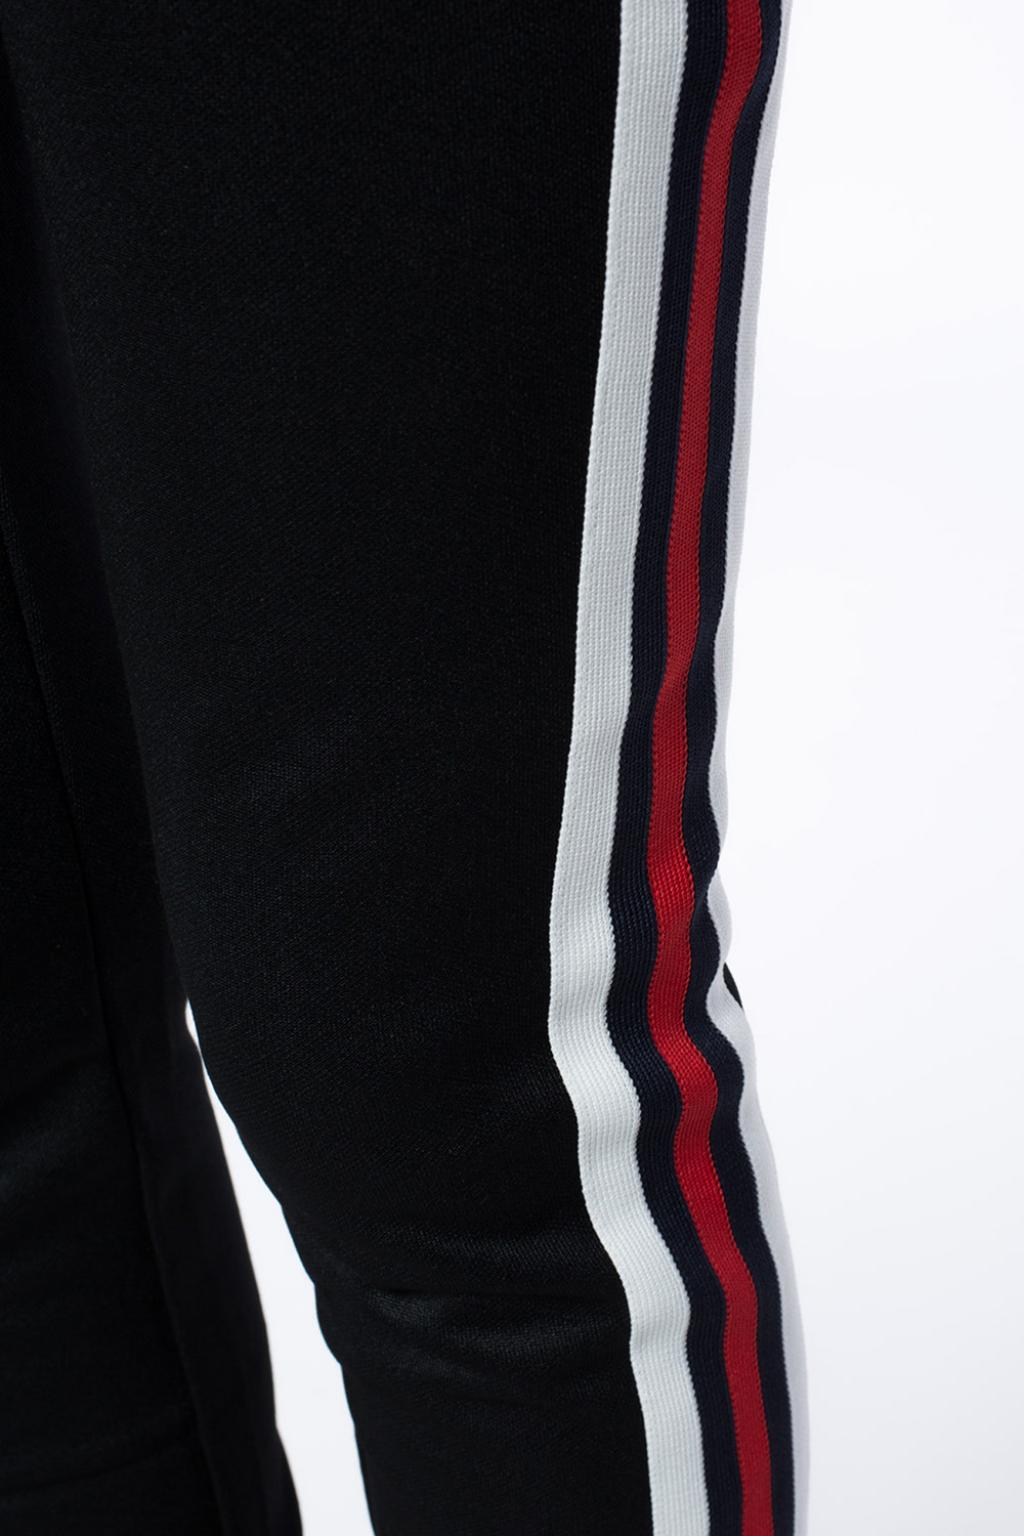 Gucci Stripedetail Tweed Trousers In Black  ModeSens